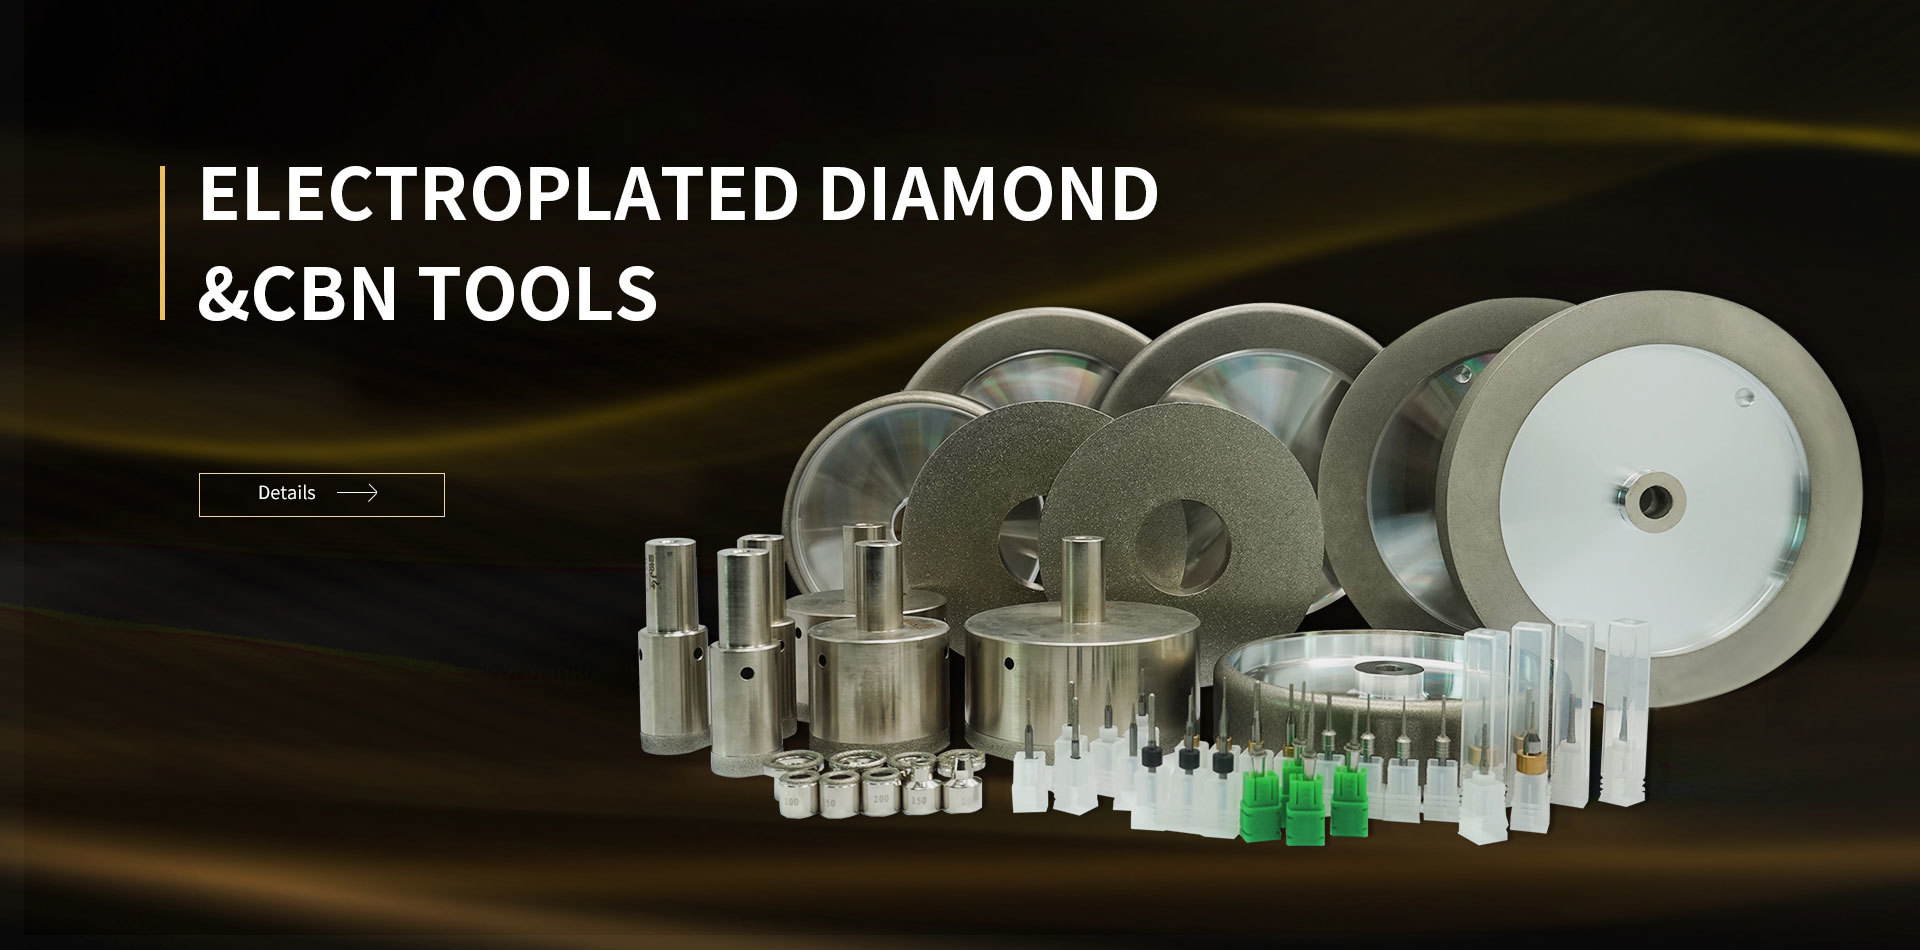 Electroplated diamond & CBN tools